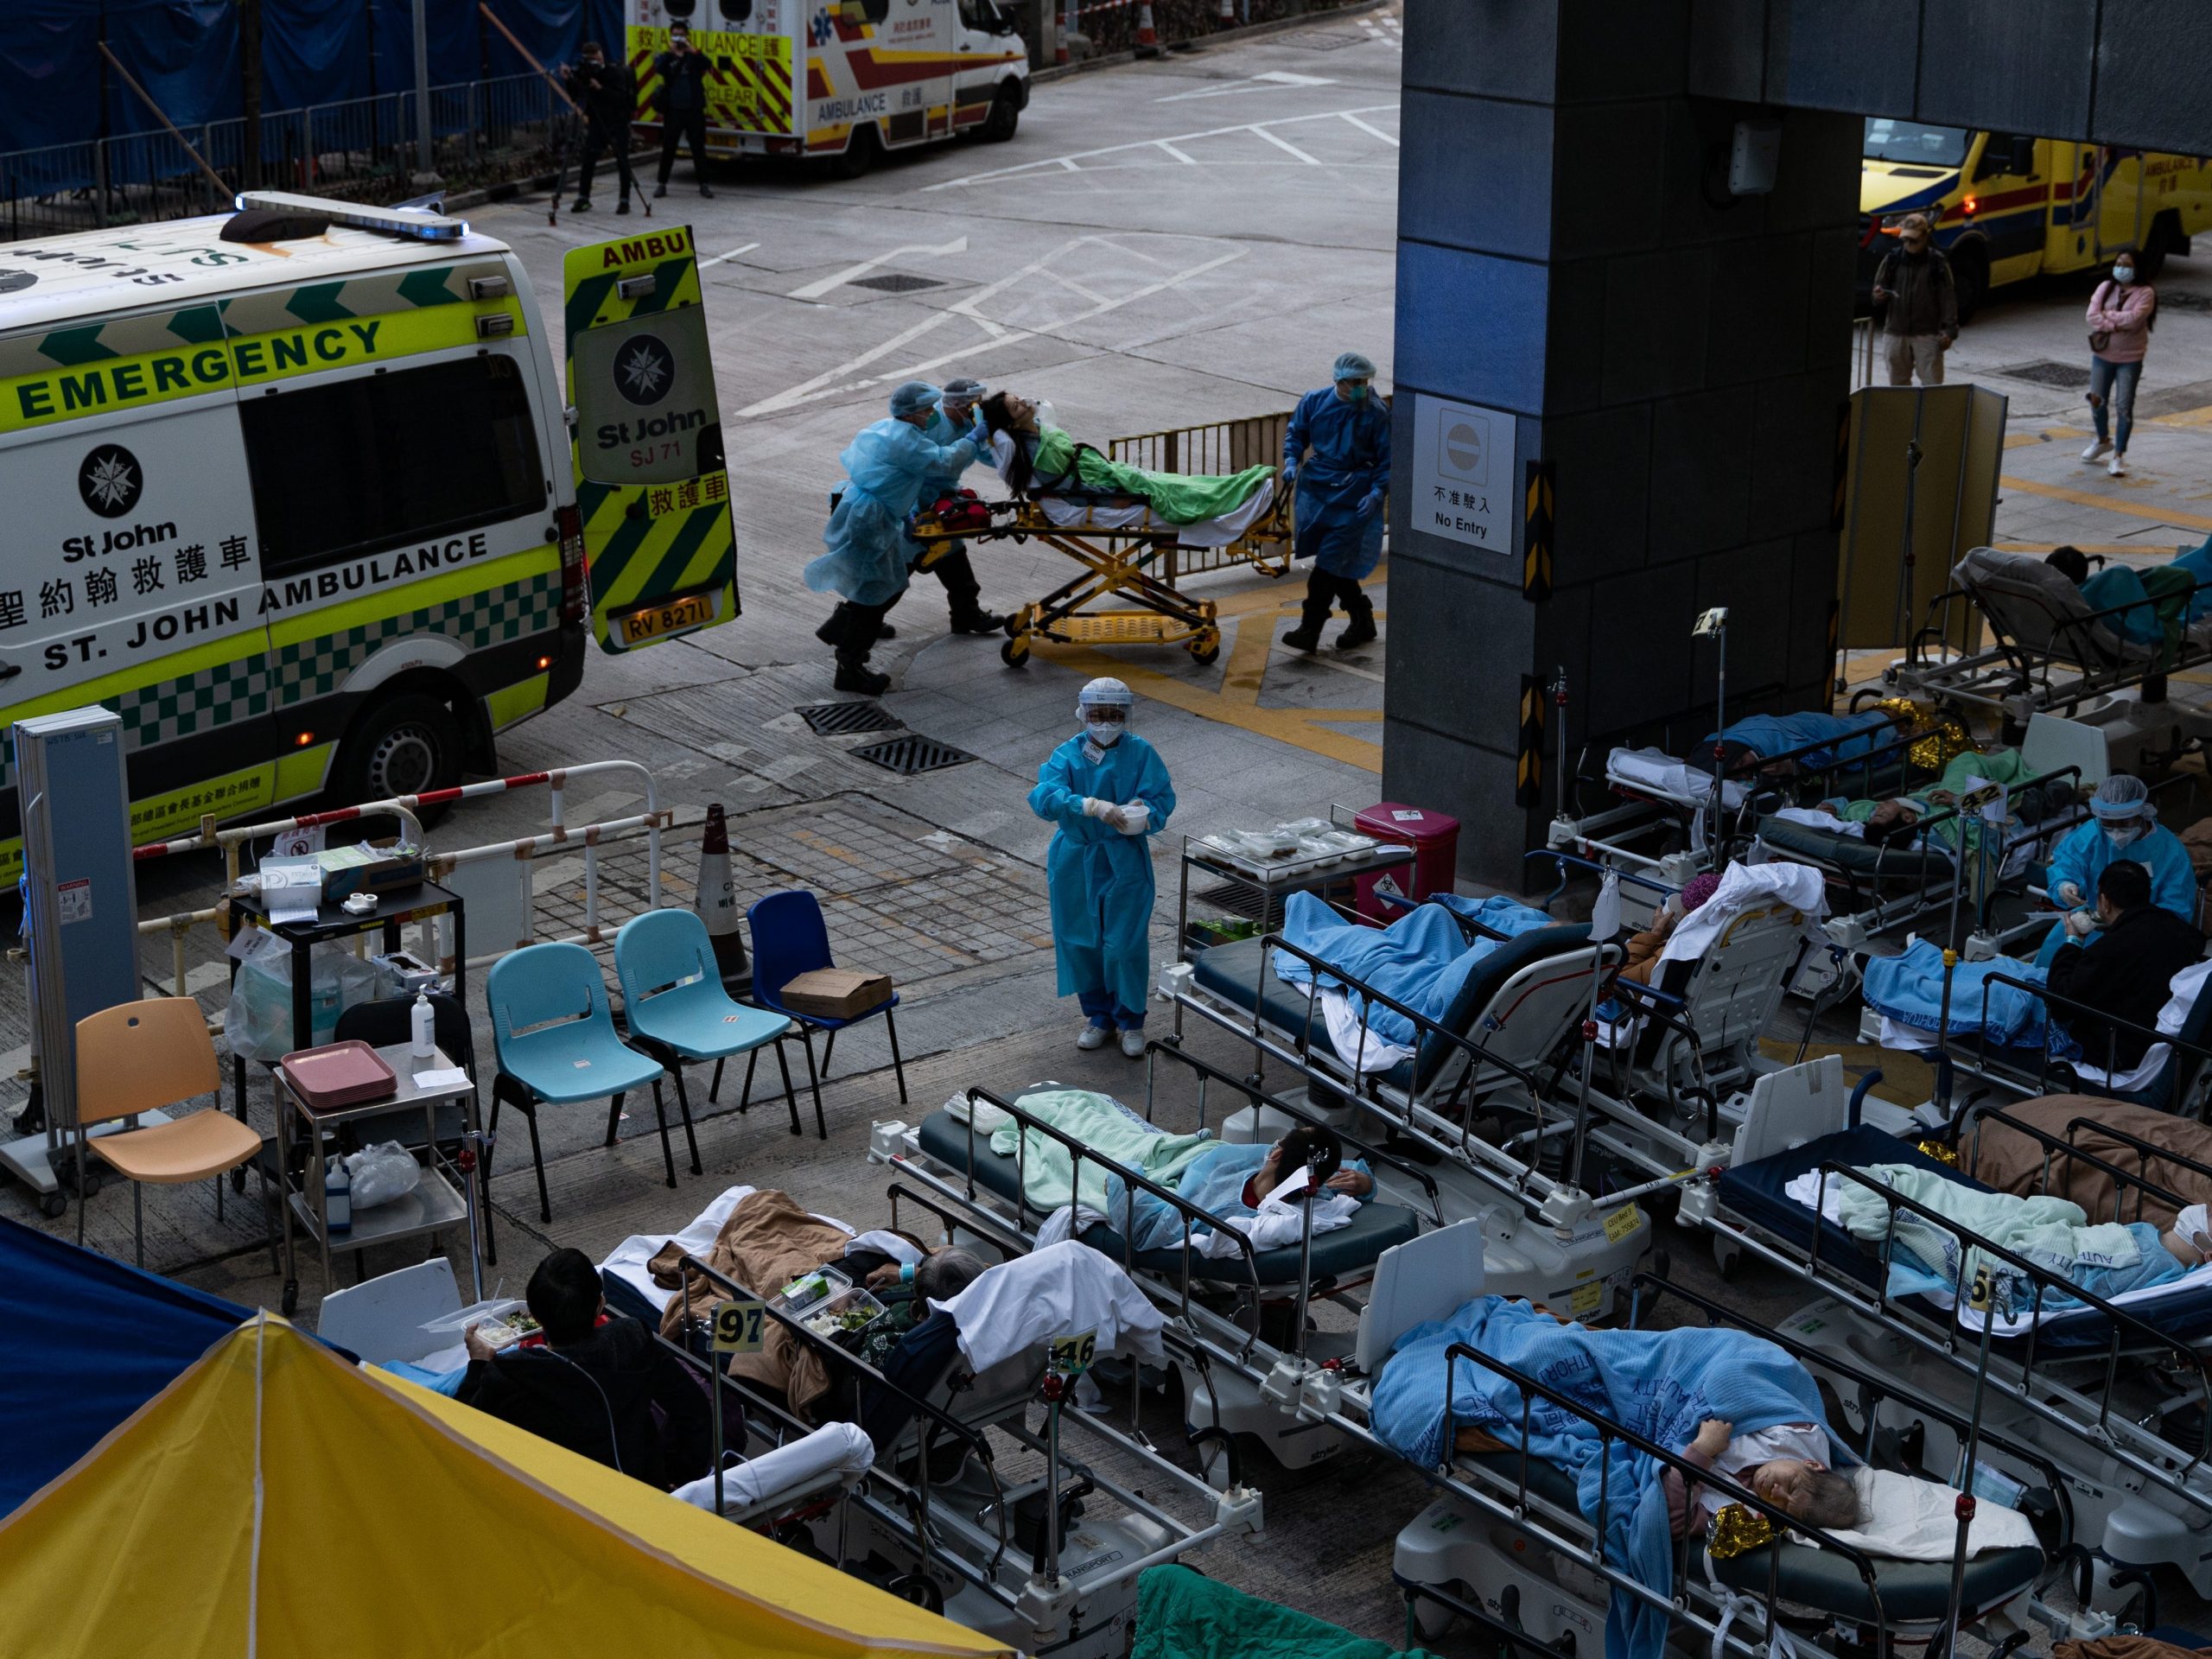 On February 16, 2022, a patient lies in a hospital bed waiting for medical treatment in a temporary holding area outside Caritas Medical Center in Hong Kong, China, as medical staff take out a new patient from an ambulance.